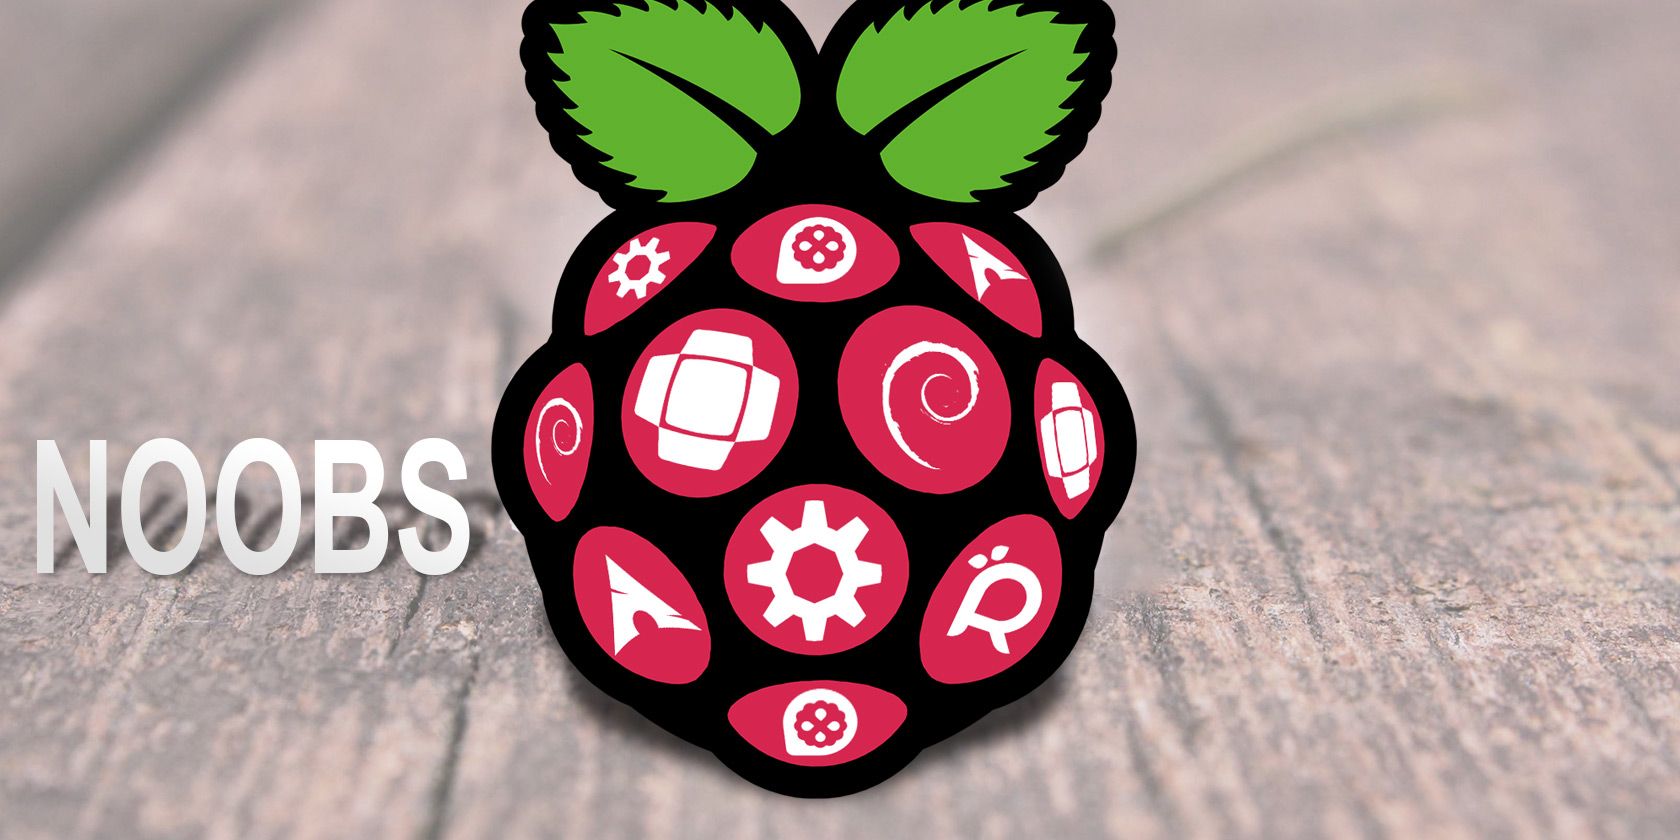 How to install NOOBS Lite and RISC OS on your Raspberry Pi 3 